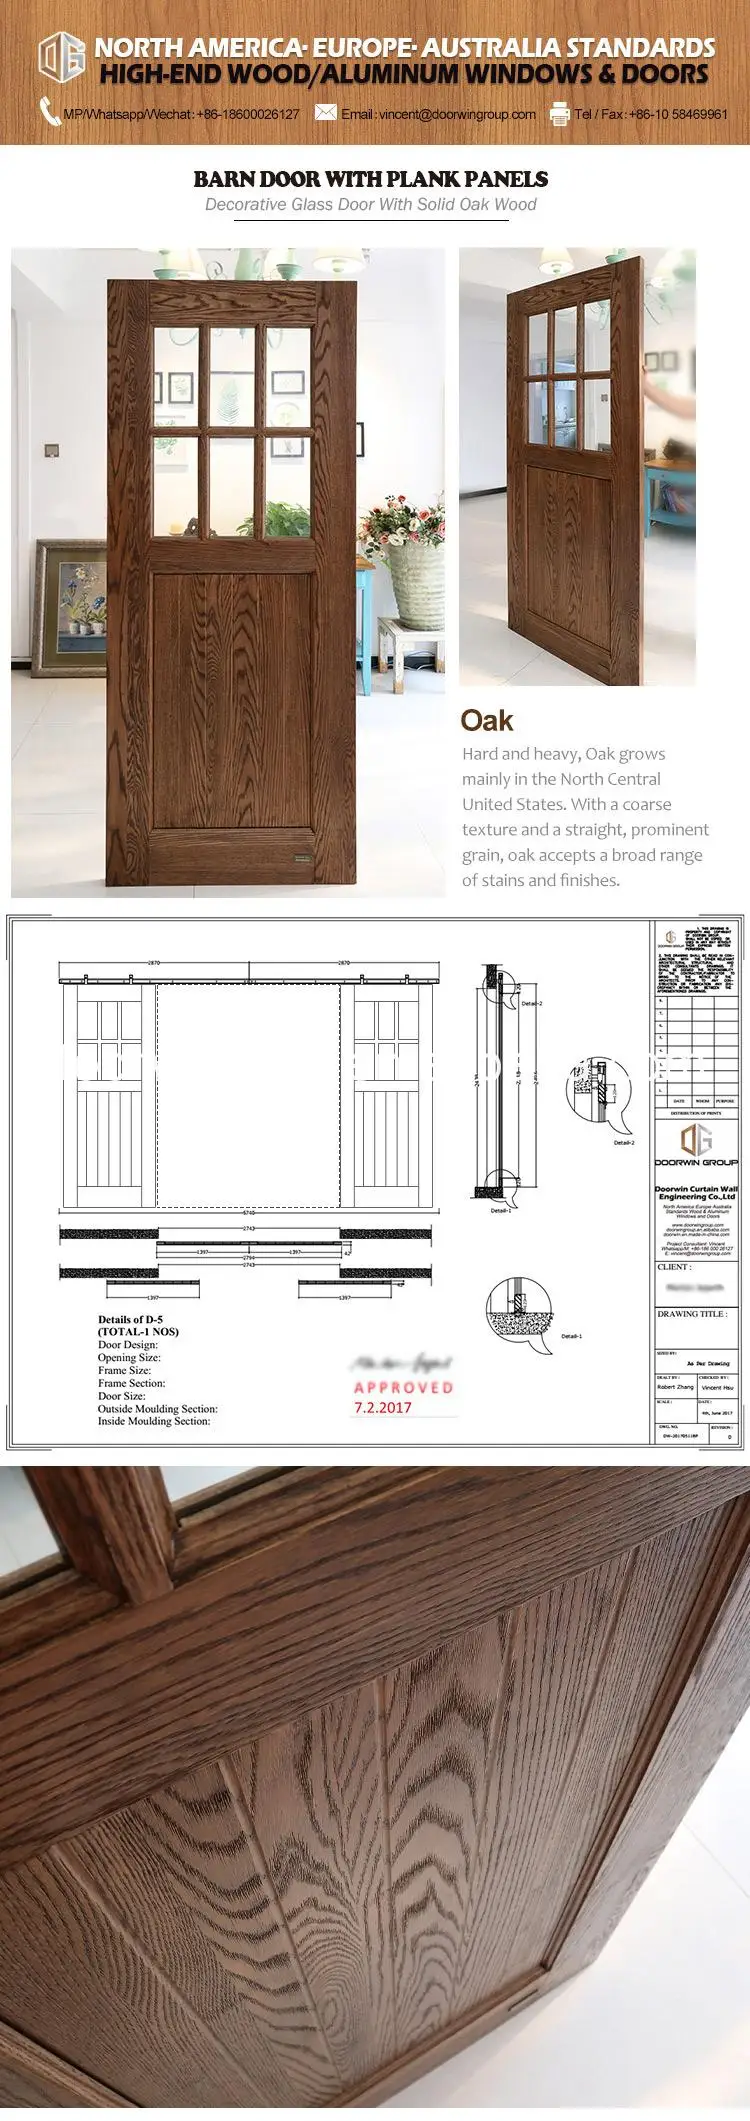 Hot sales interior room doors with glass residential barn pantry